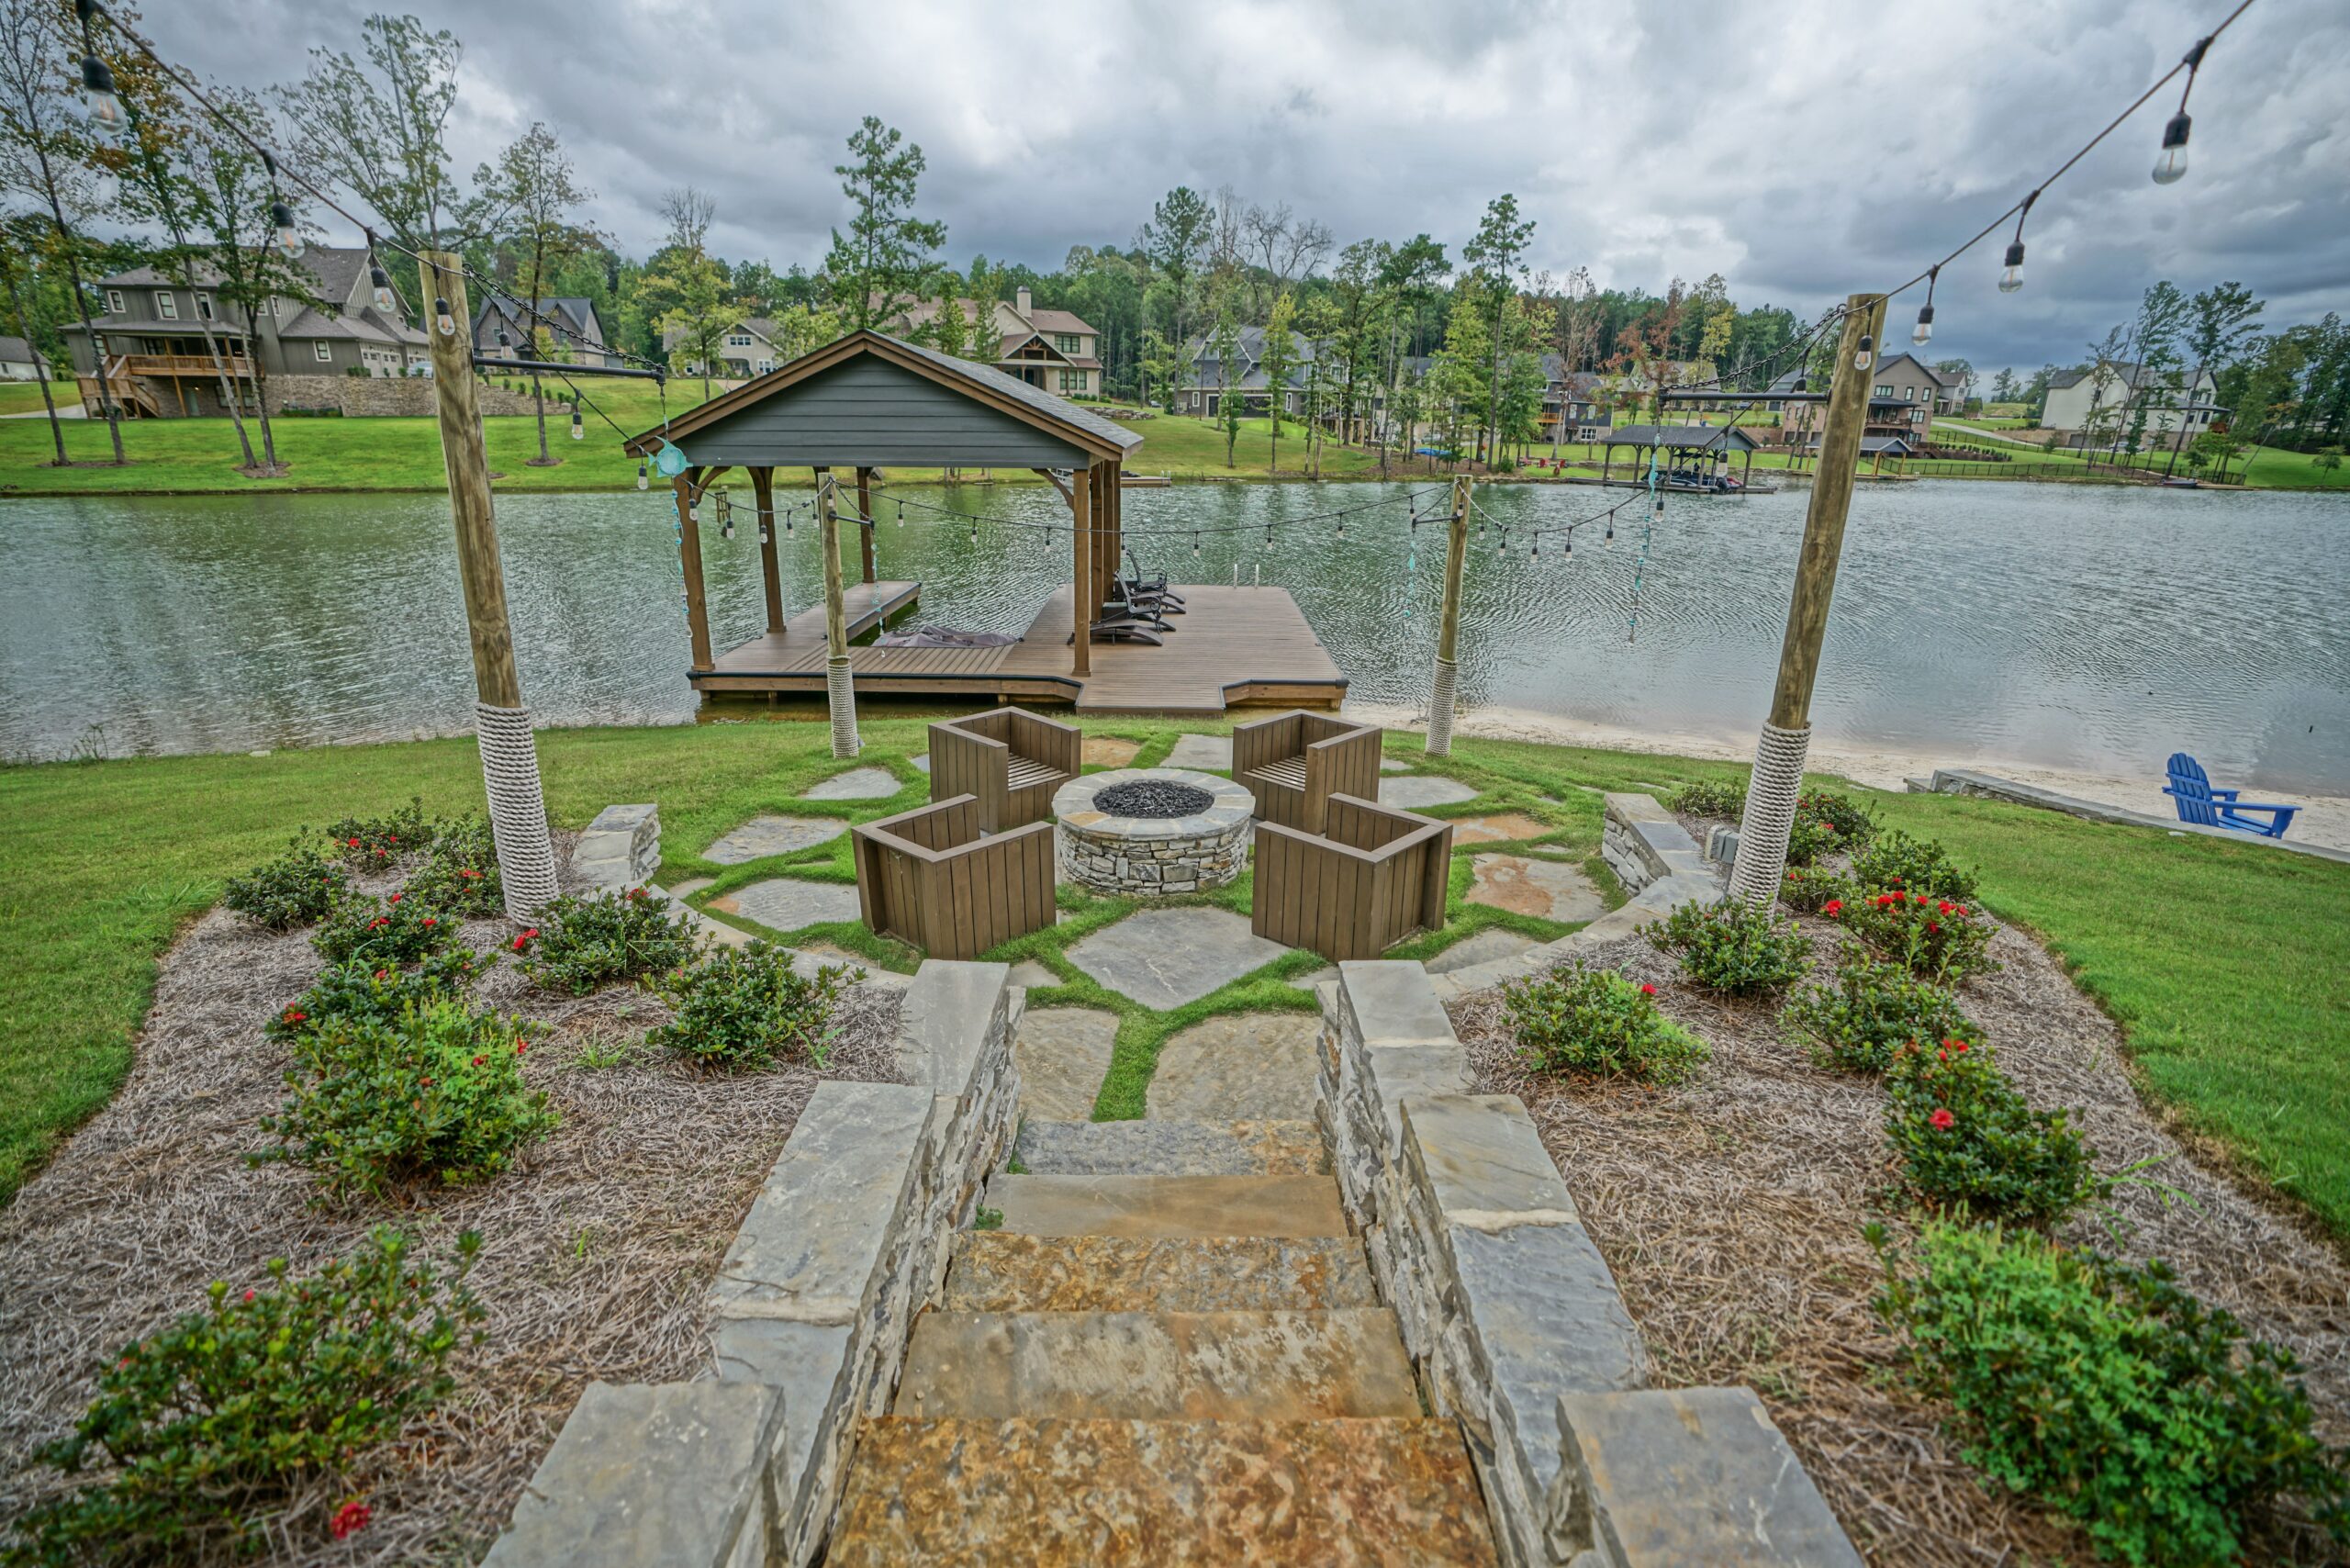 A patio area with fire pit and gazebo by the water.